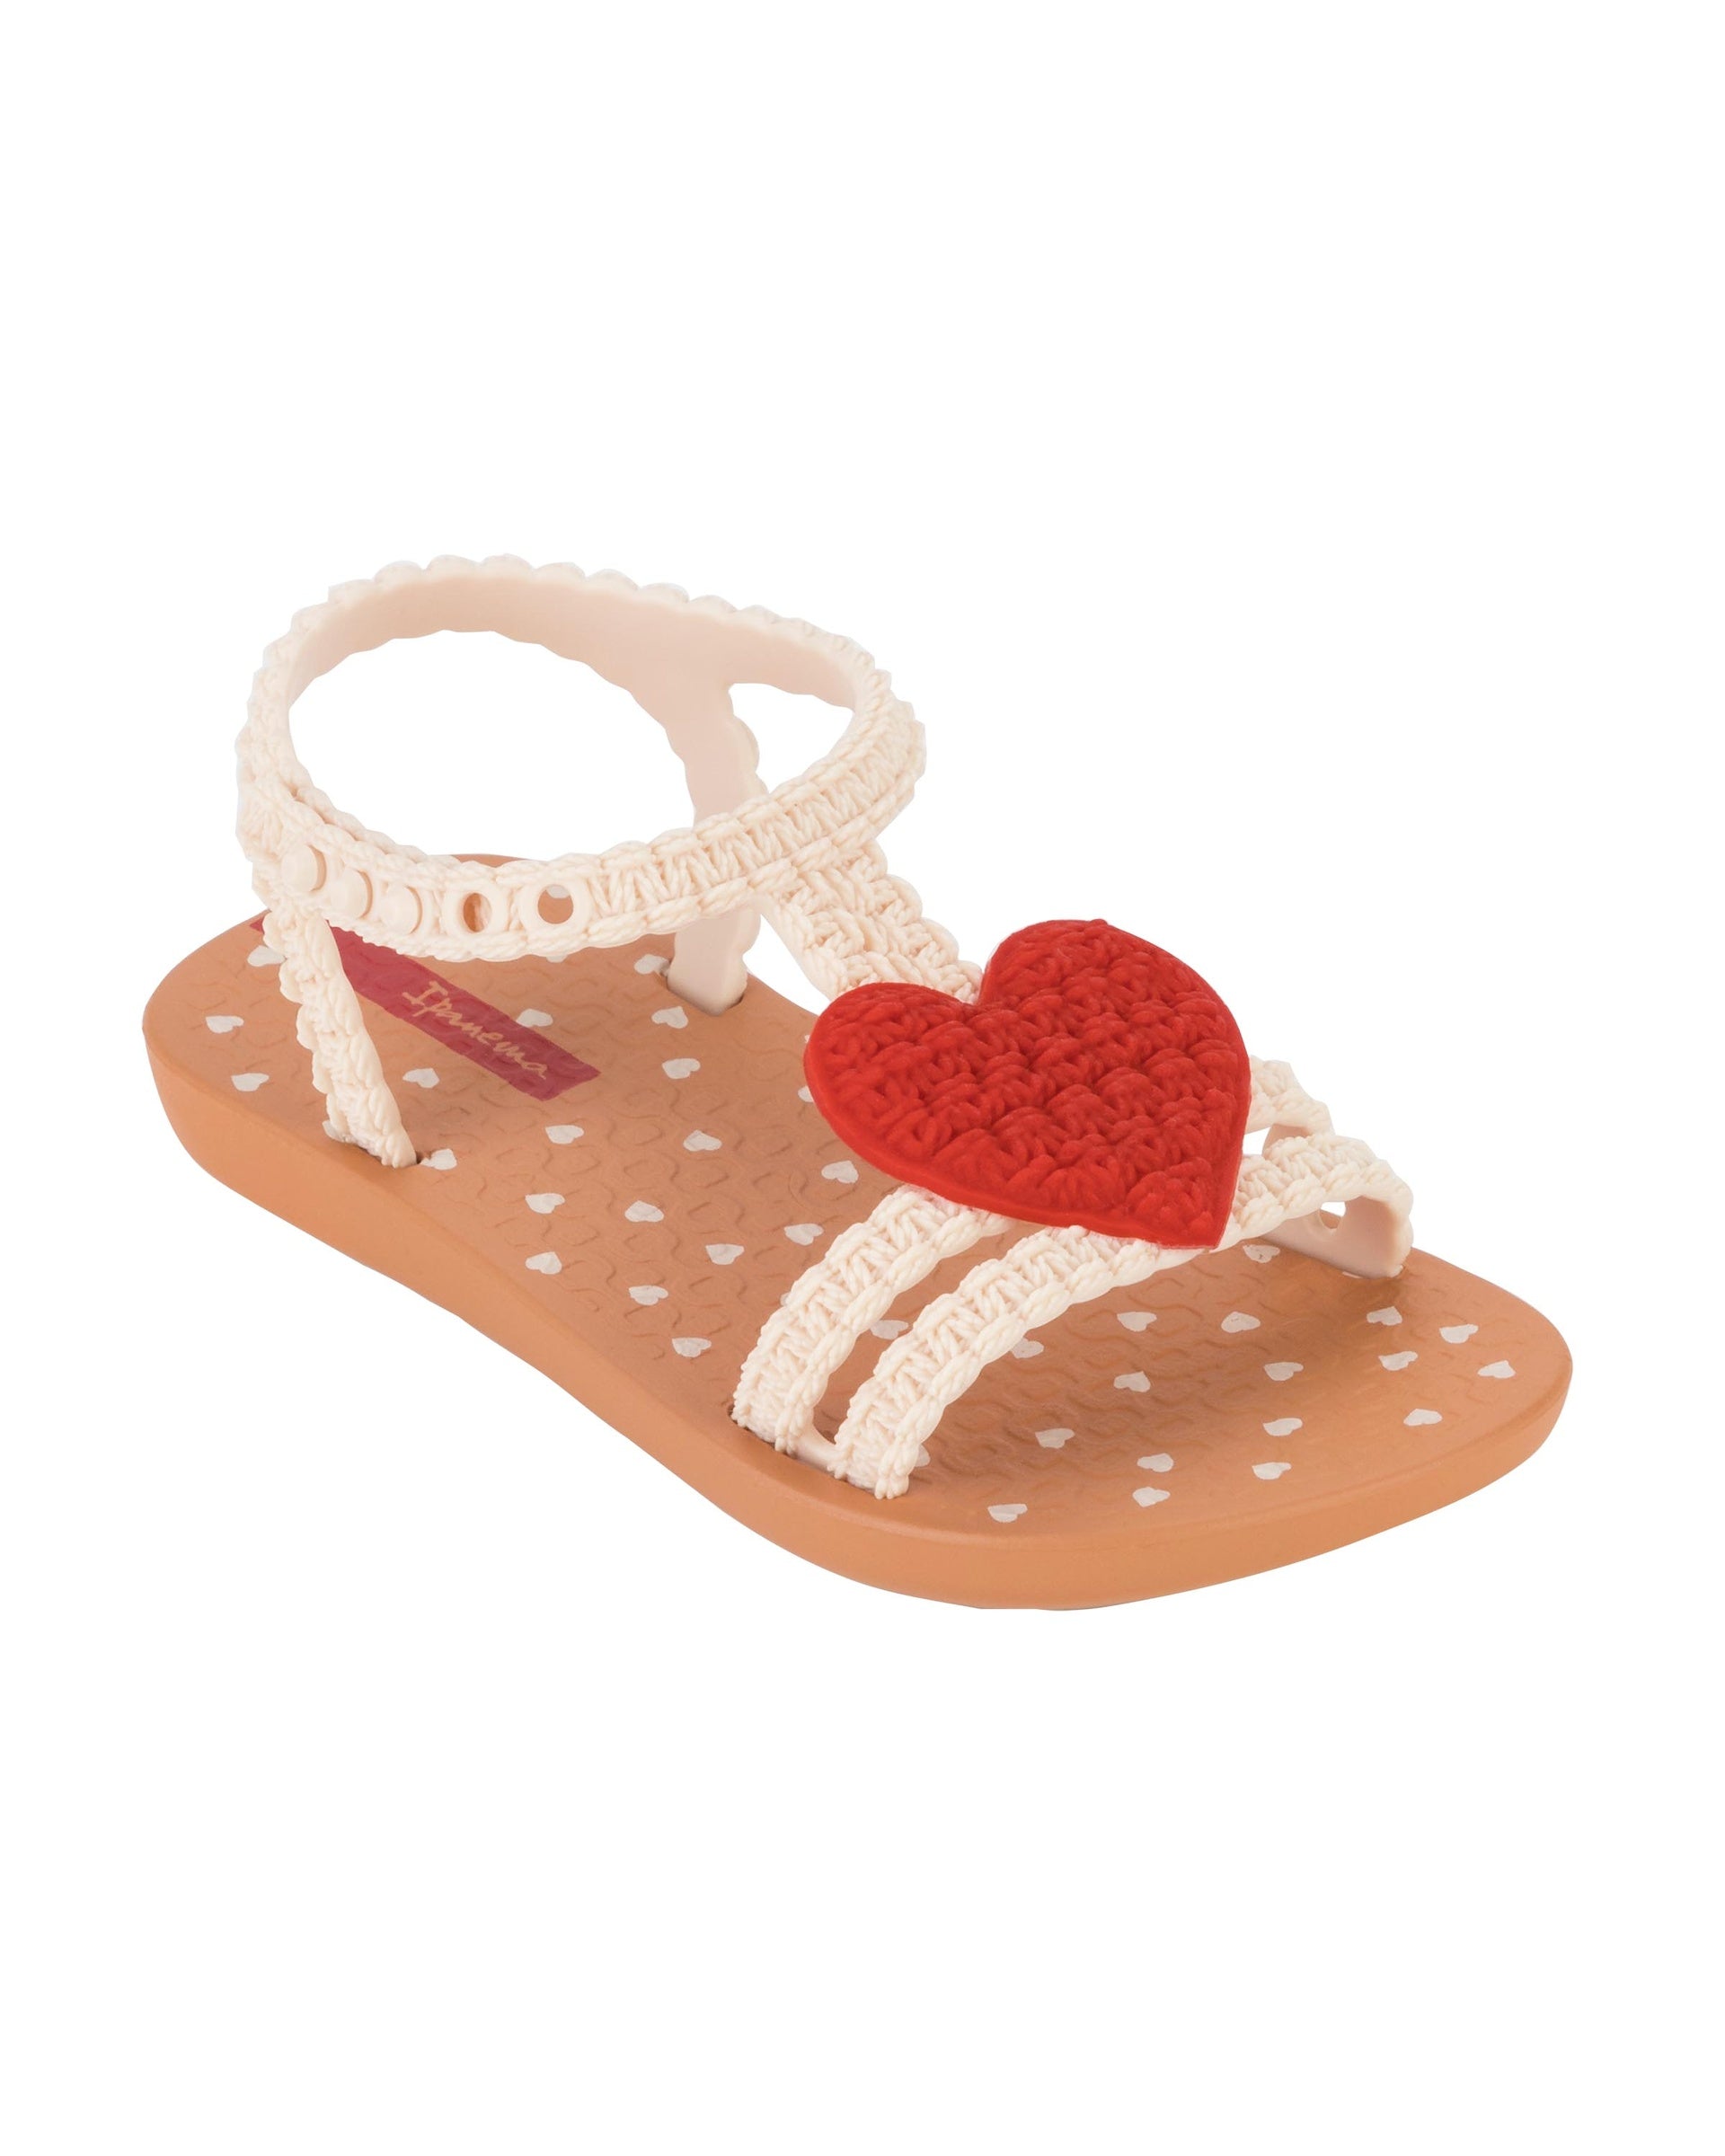 Angled view of a beige Ipanema My First Ipanema baby sandal with red heart on top and crochet texture .